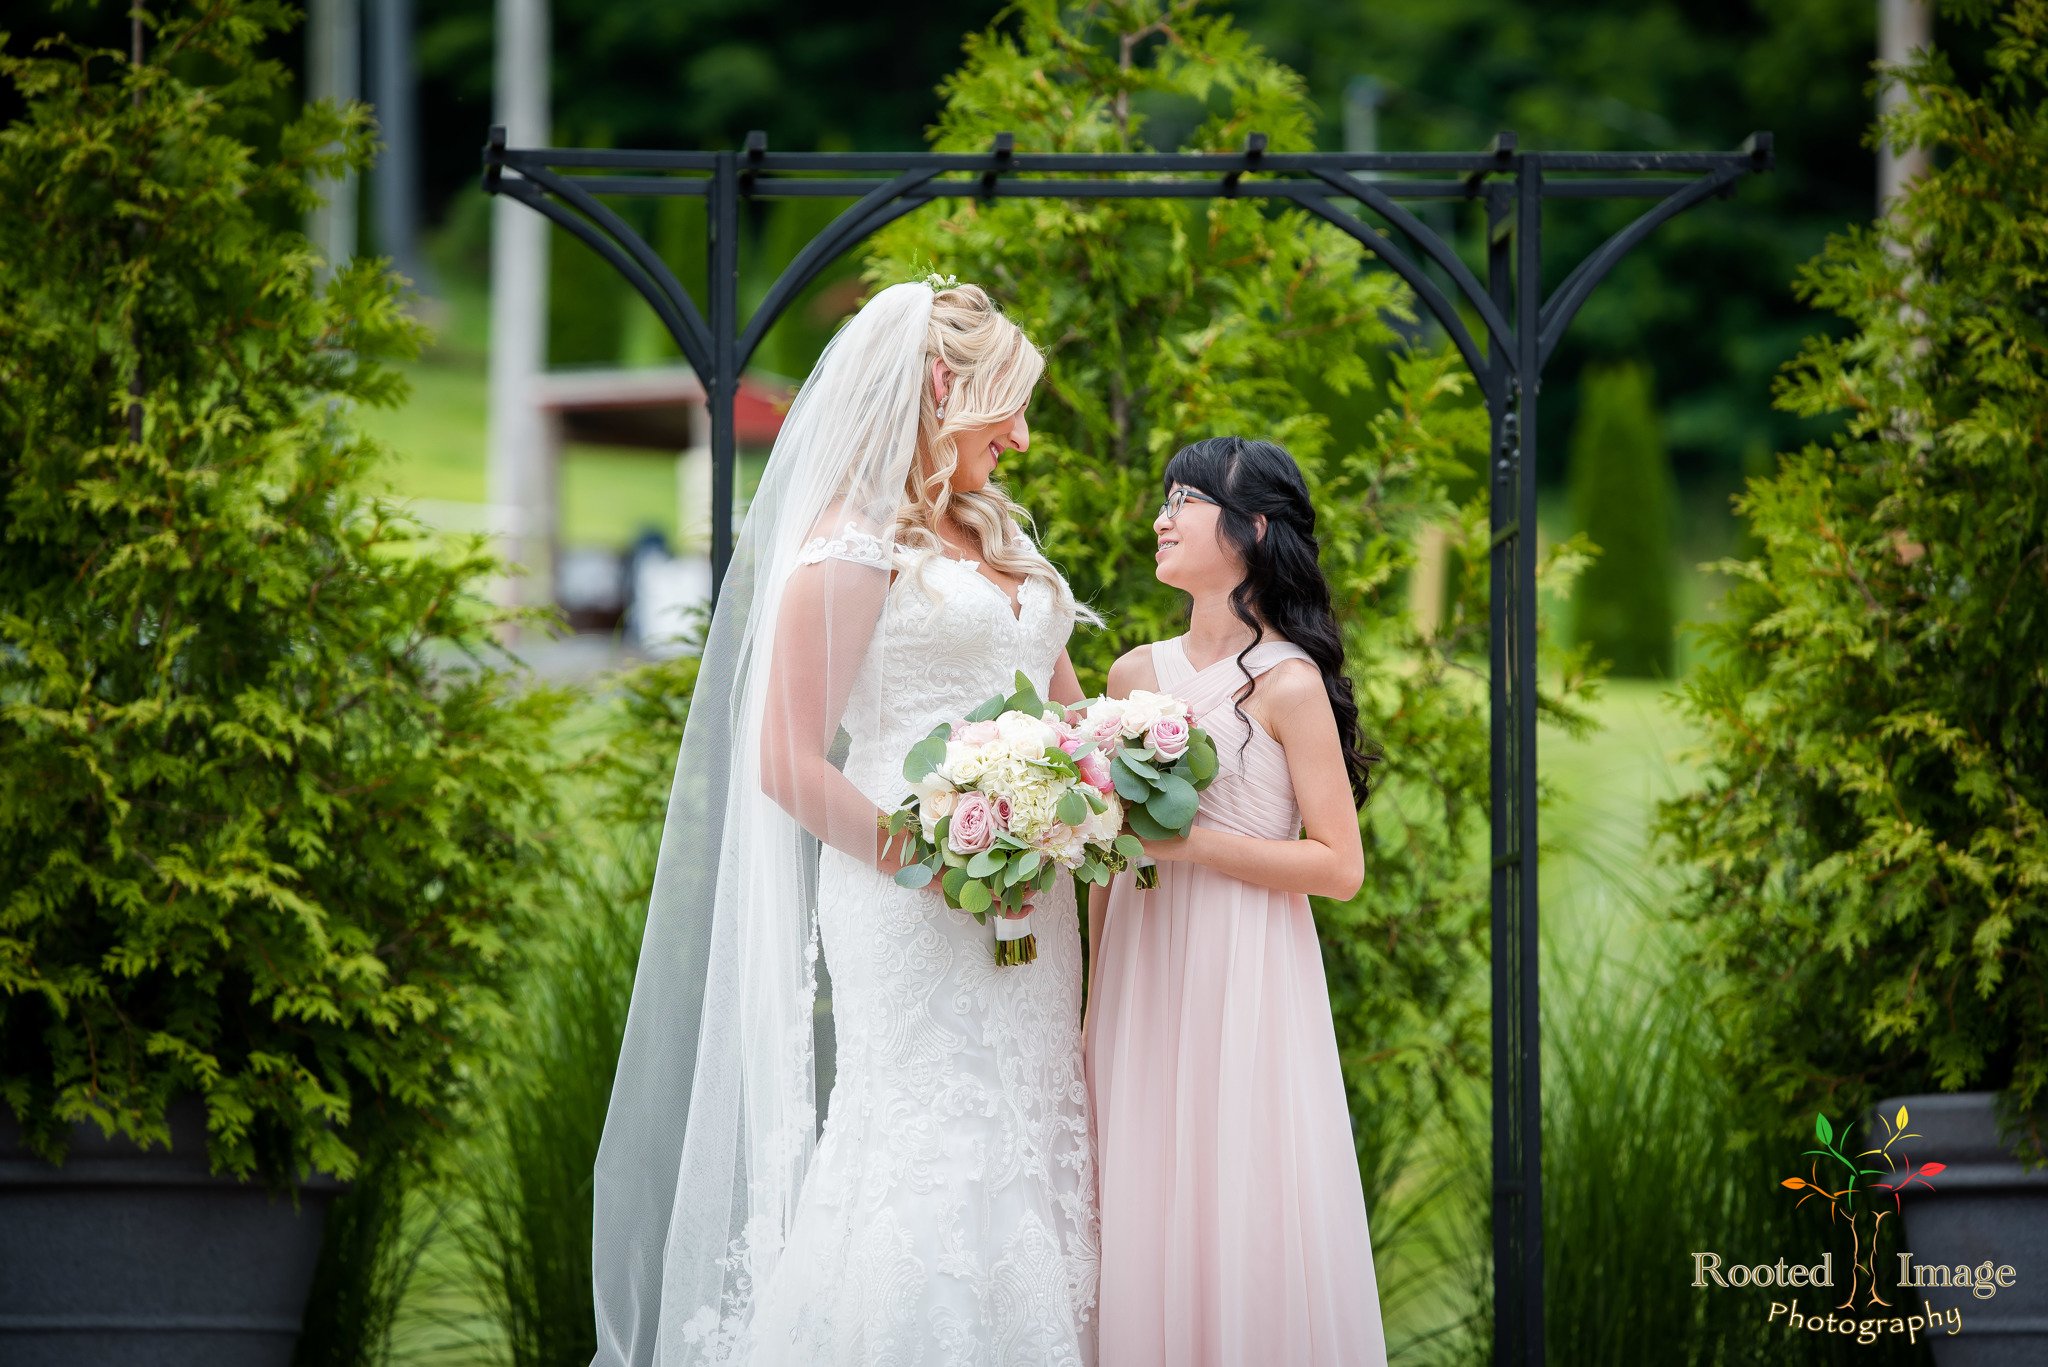 Bear Creek Mountain Resort Wedding by DPNAK Events with Alisha Nycole and Co. and Rooted Image Photography